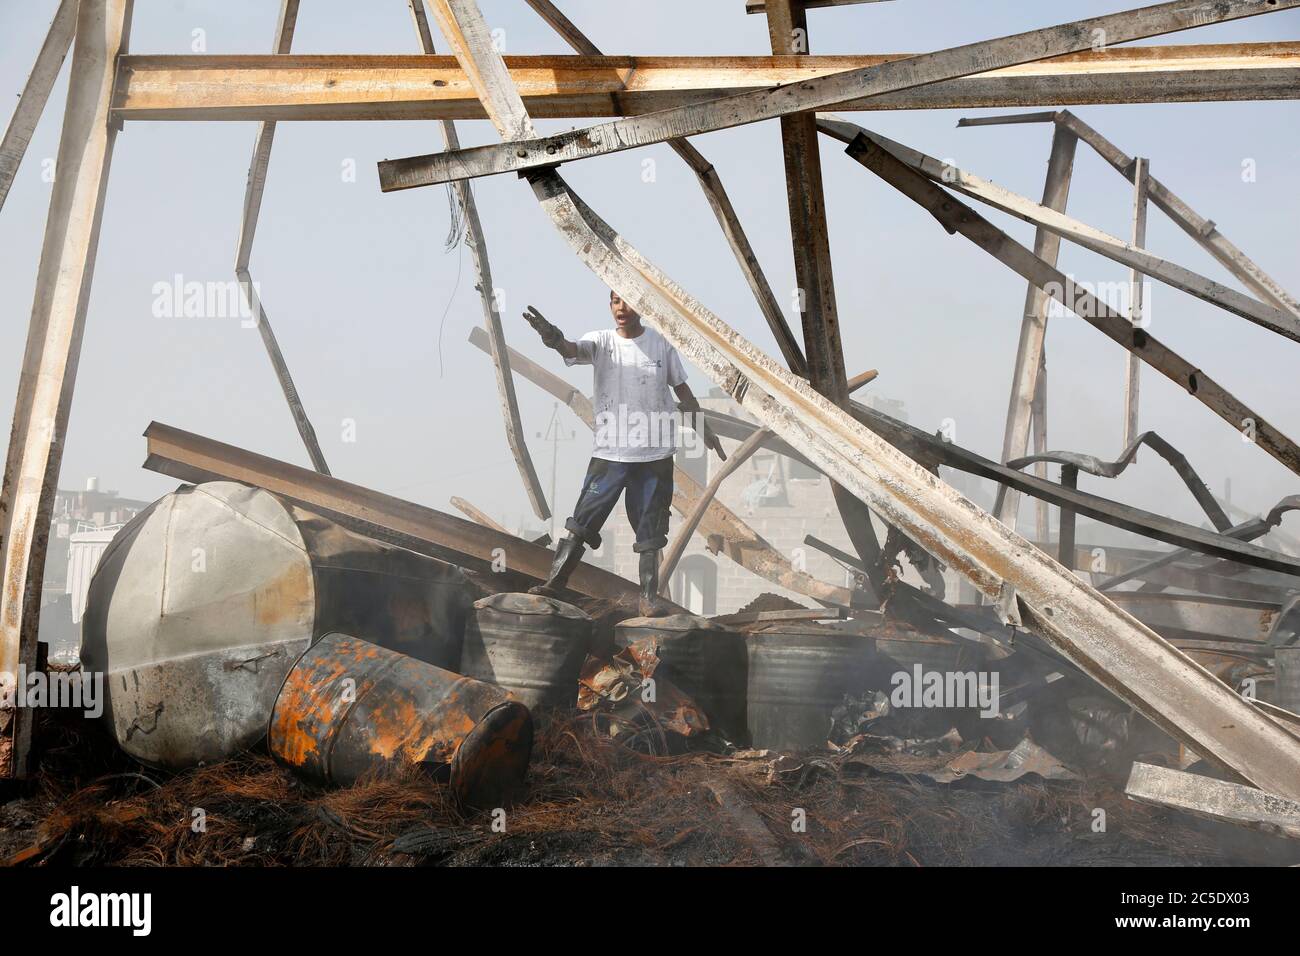 Sanaa, Yemen. 2nd July, 2020. A boy inspects a warehouse after it was hit by airstrikes in Sanaa, Yemen, on July 2, 2020. The Saudi-led coalition on Wednesday launched a series of airstrikes on the Yemeni capital Sanaa, which is under Houthi control, the Houthi-run al-Masirah TV reported. Credit: Mohammed Mohammed/Xinhua/Alamy Live News Stock Photo